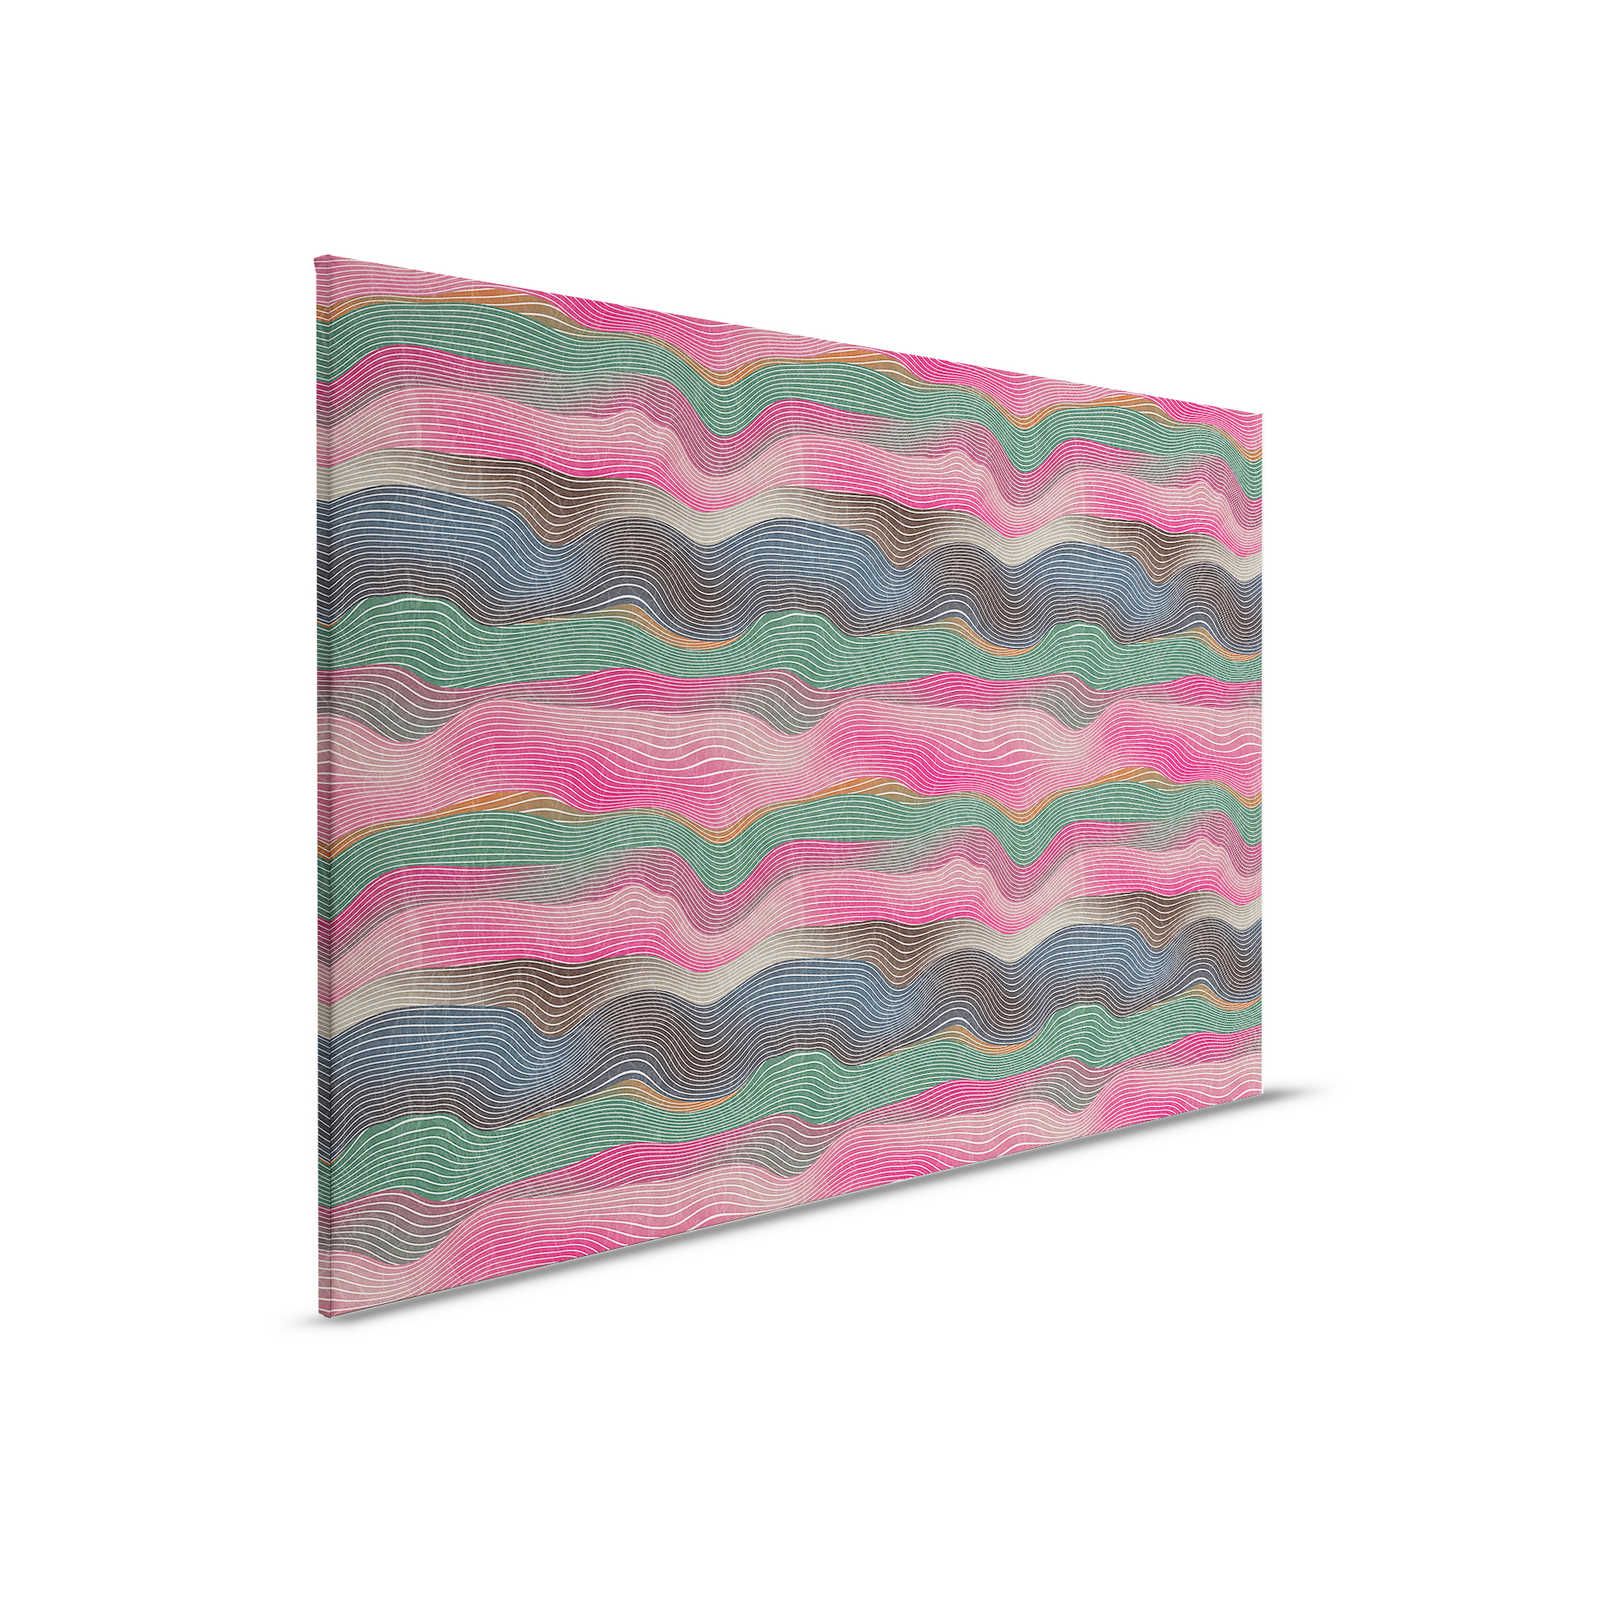         Space 1 - Canvas painting Waves Pattern Pink & Green Retro Style - 0,90 m x 0,60 m
    